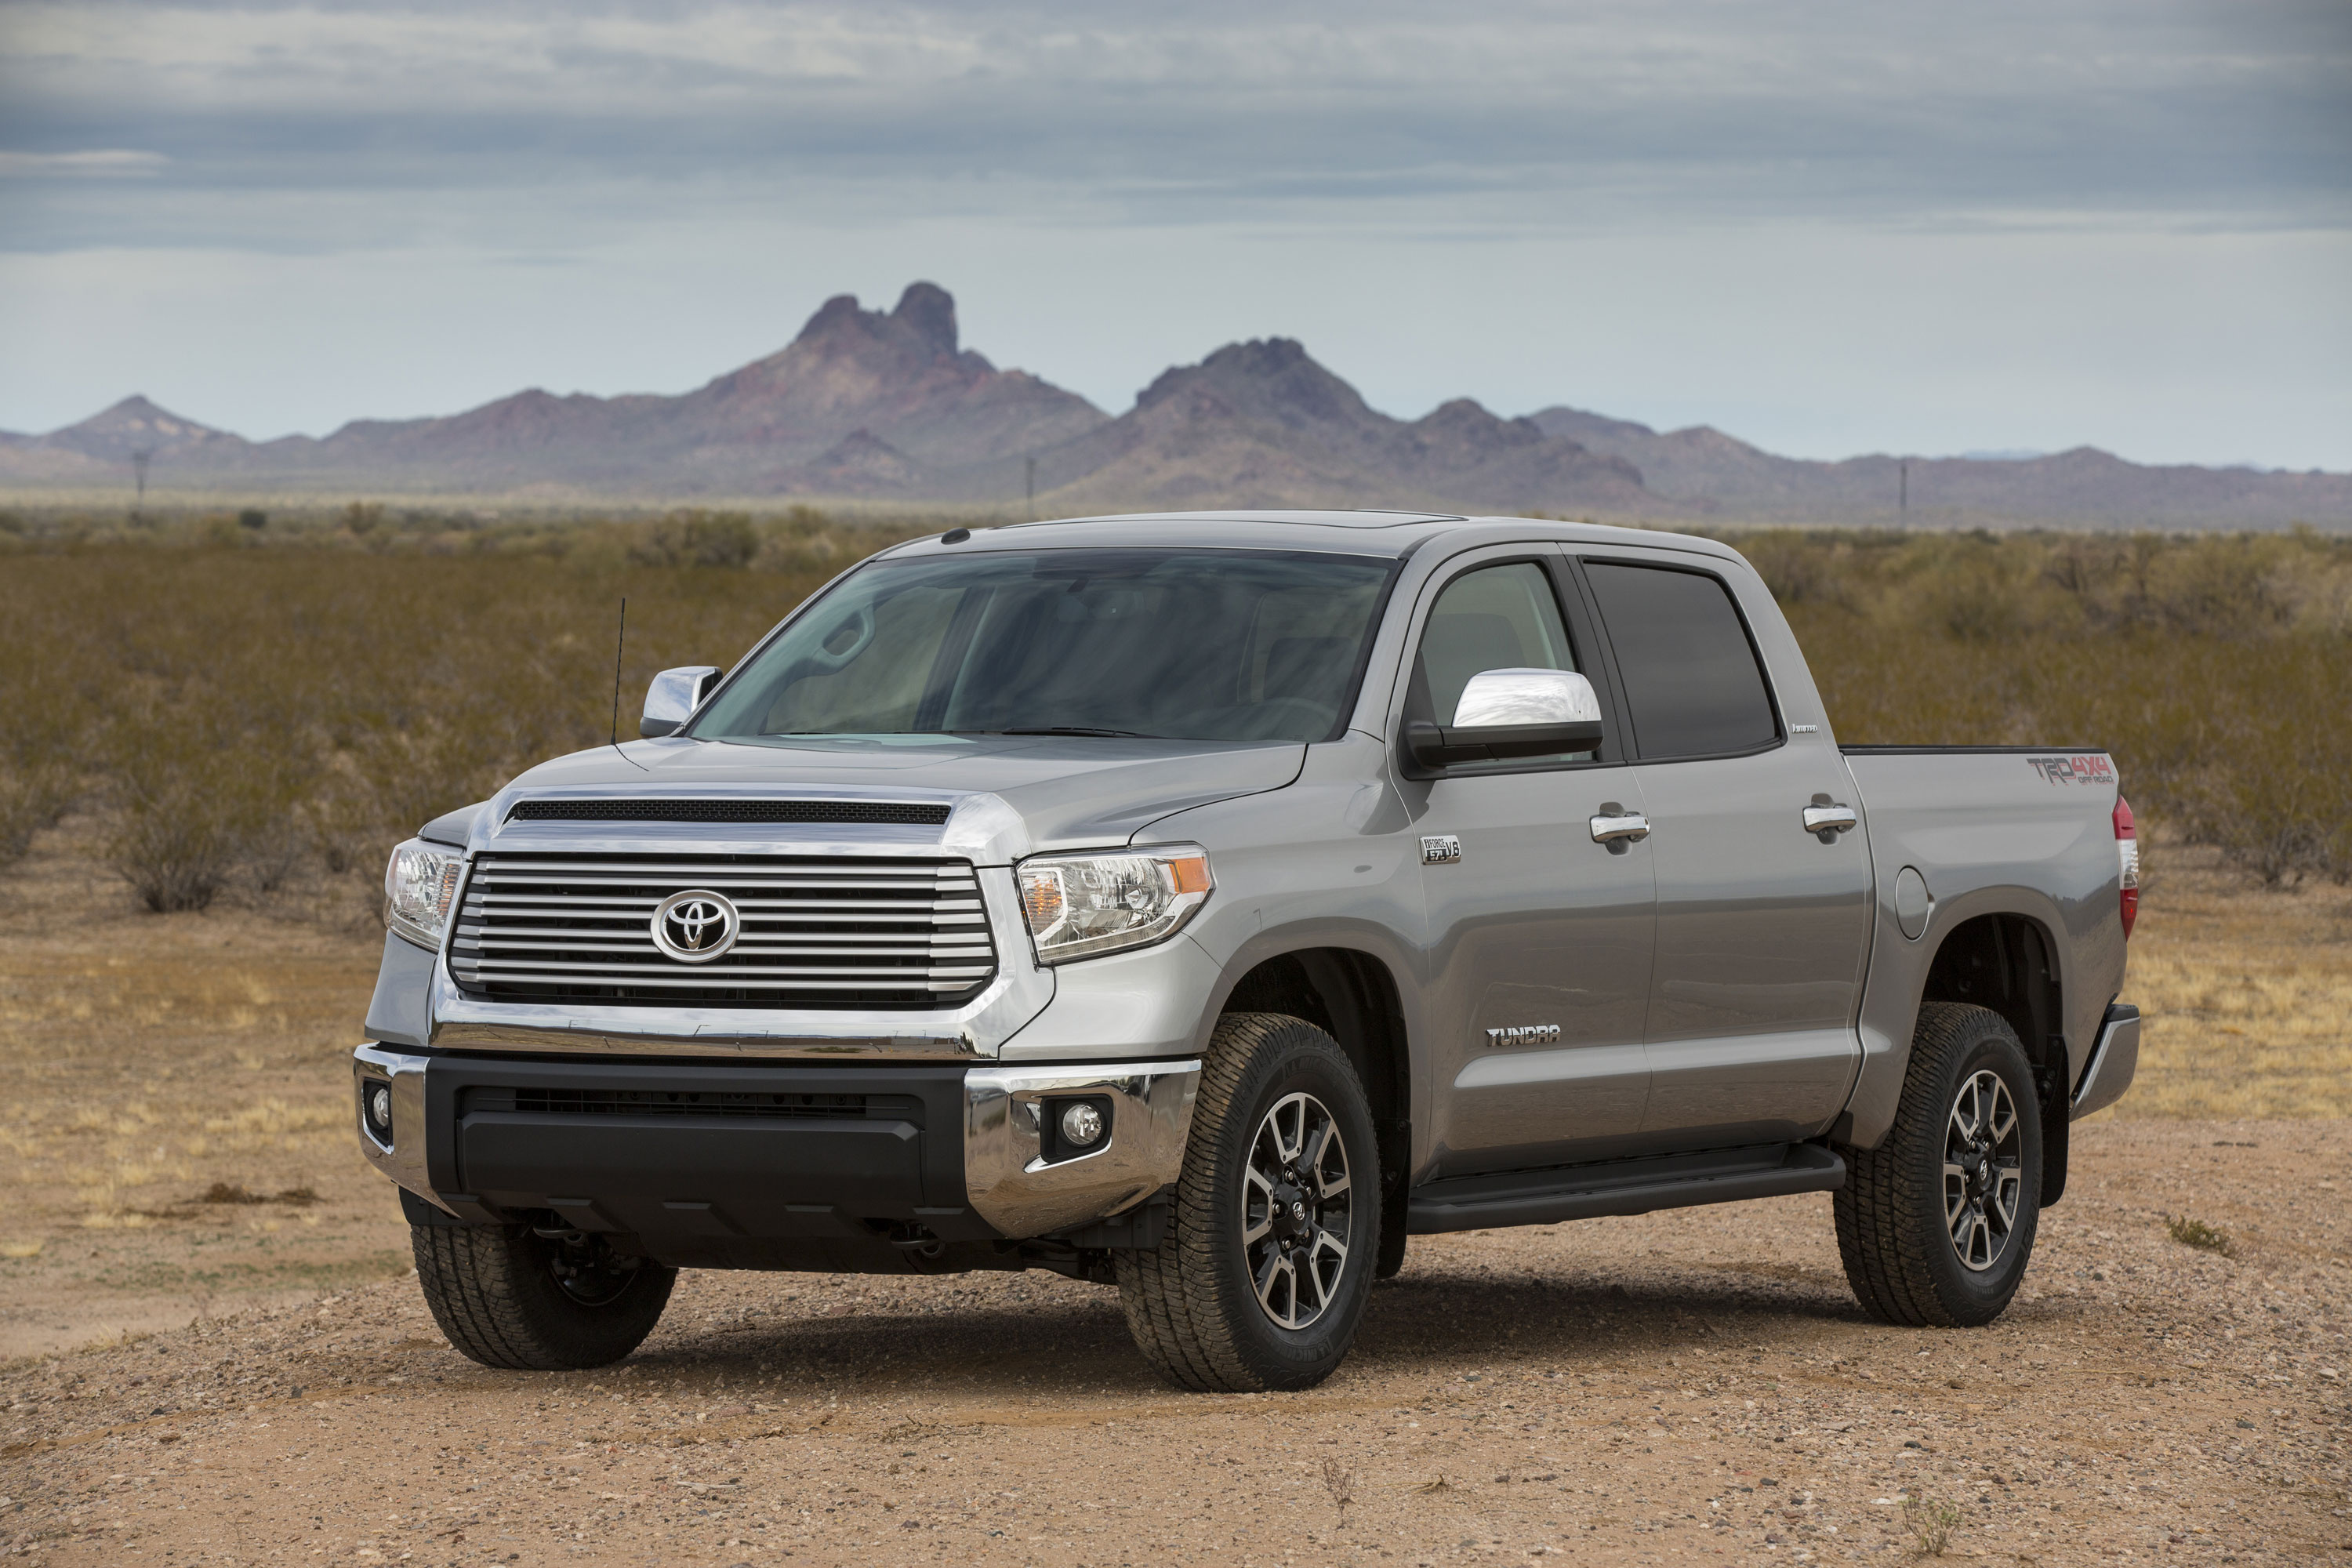 Toyota Tundra, 2015 truck legacy, Netcarshow image, Automotive excellence, 3000x2000 HD Desktop